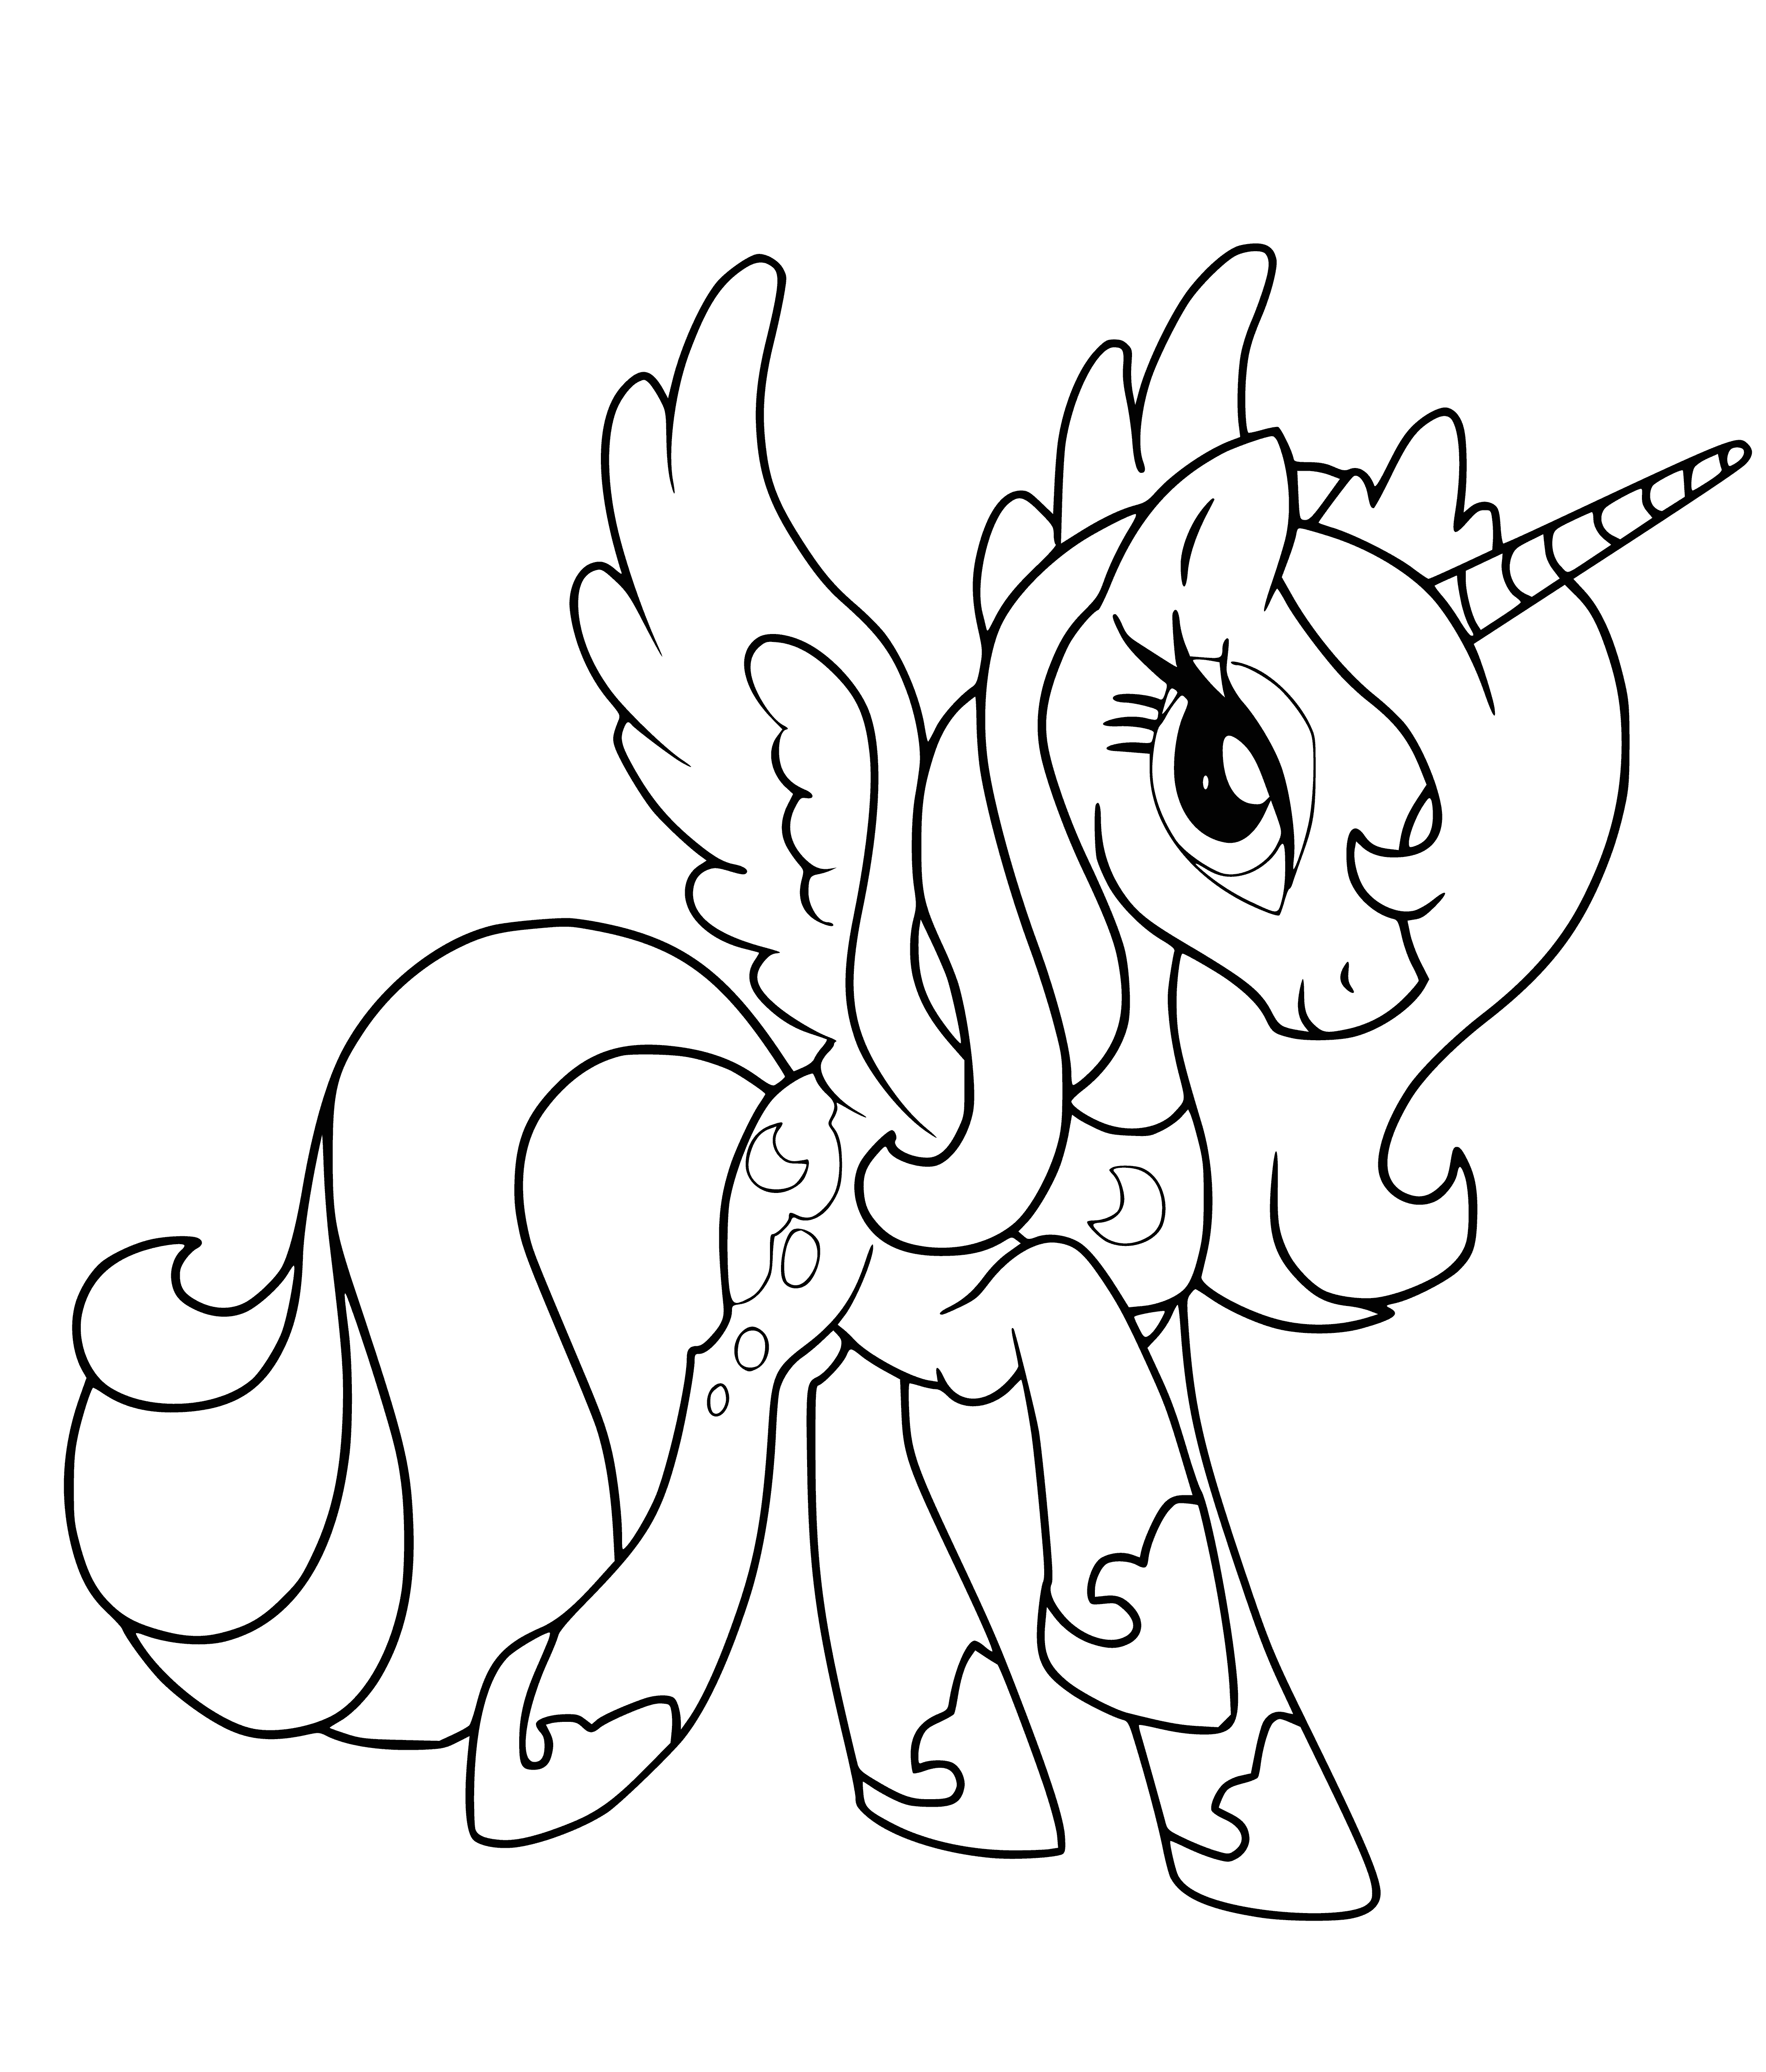 coloring page: Princess Luna is a pony who looks like the night sky with blue body/mane/tail, bright blue eyes and a silver crown.